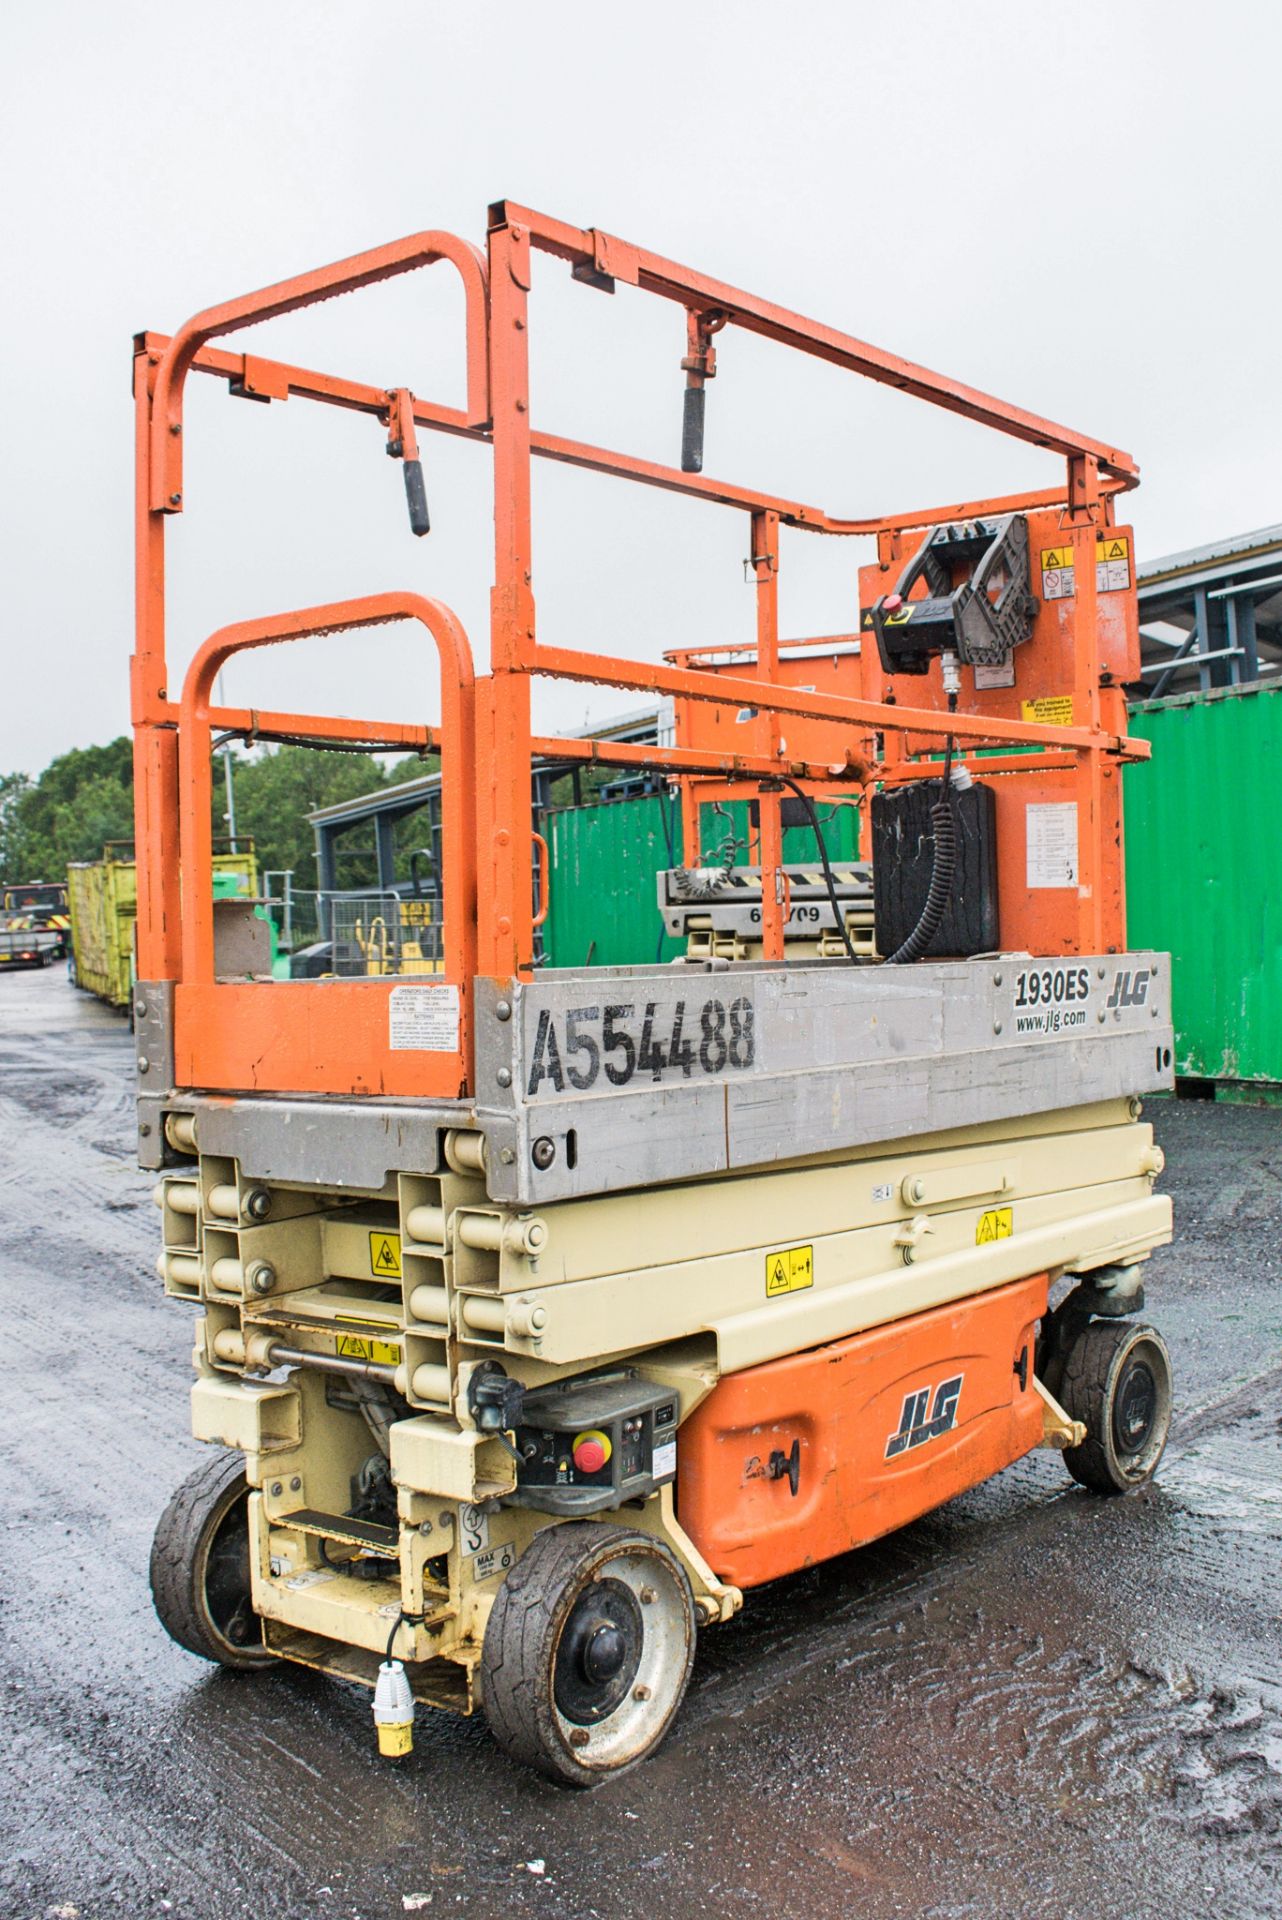 JLG 1930ES battery electric scissor lift Year: 2011 S/N: 24915 Recorded Hours: 215 A554488 - Image 4 of 8